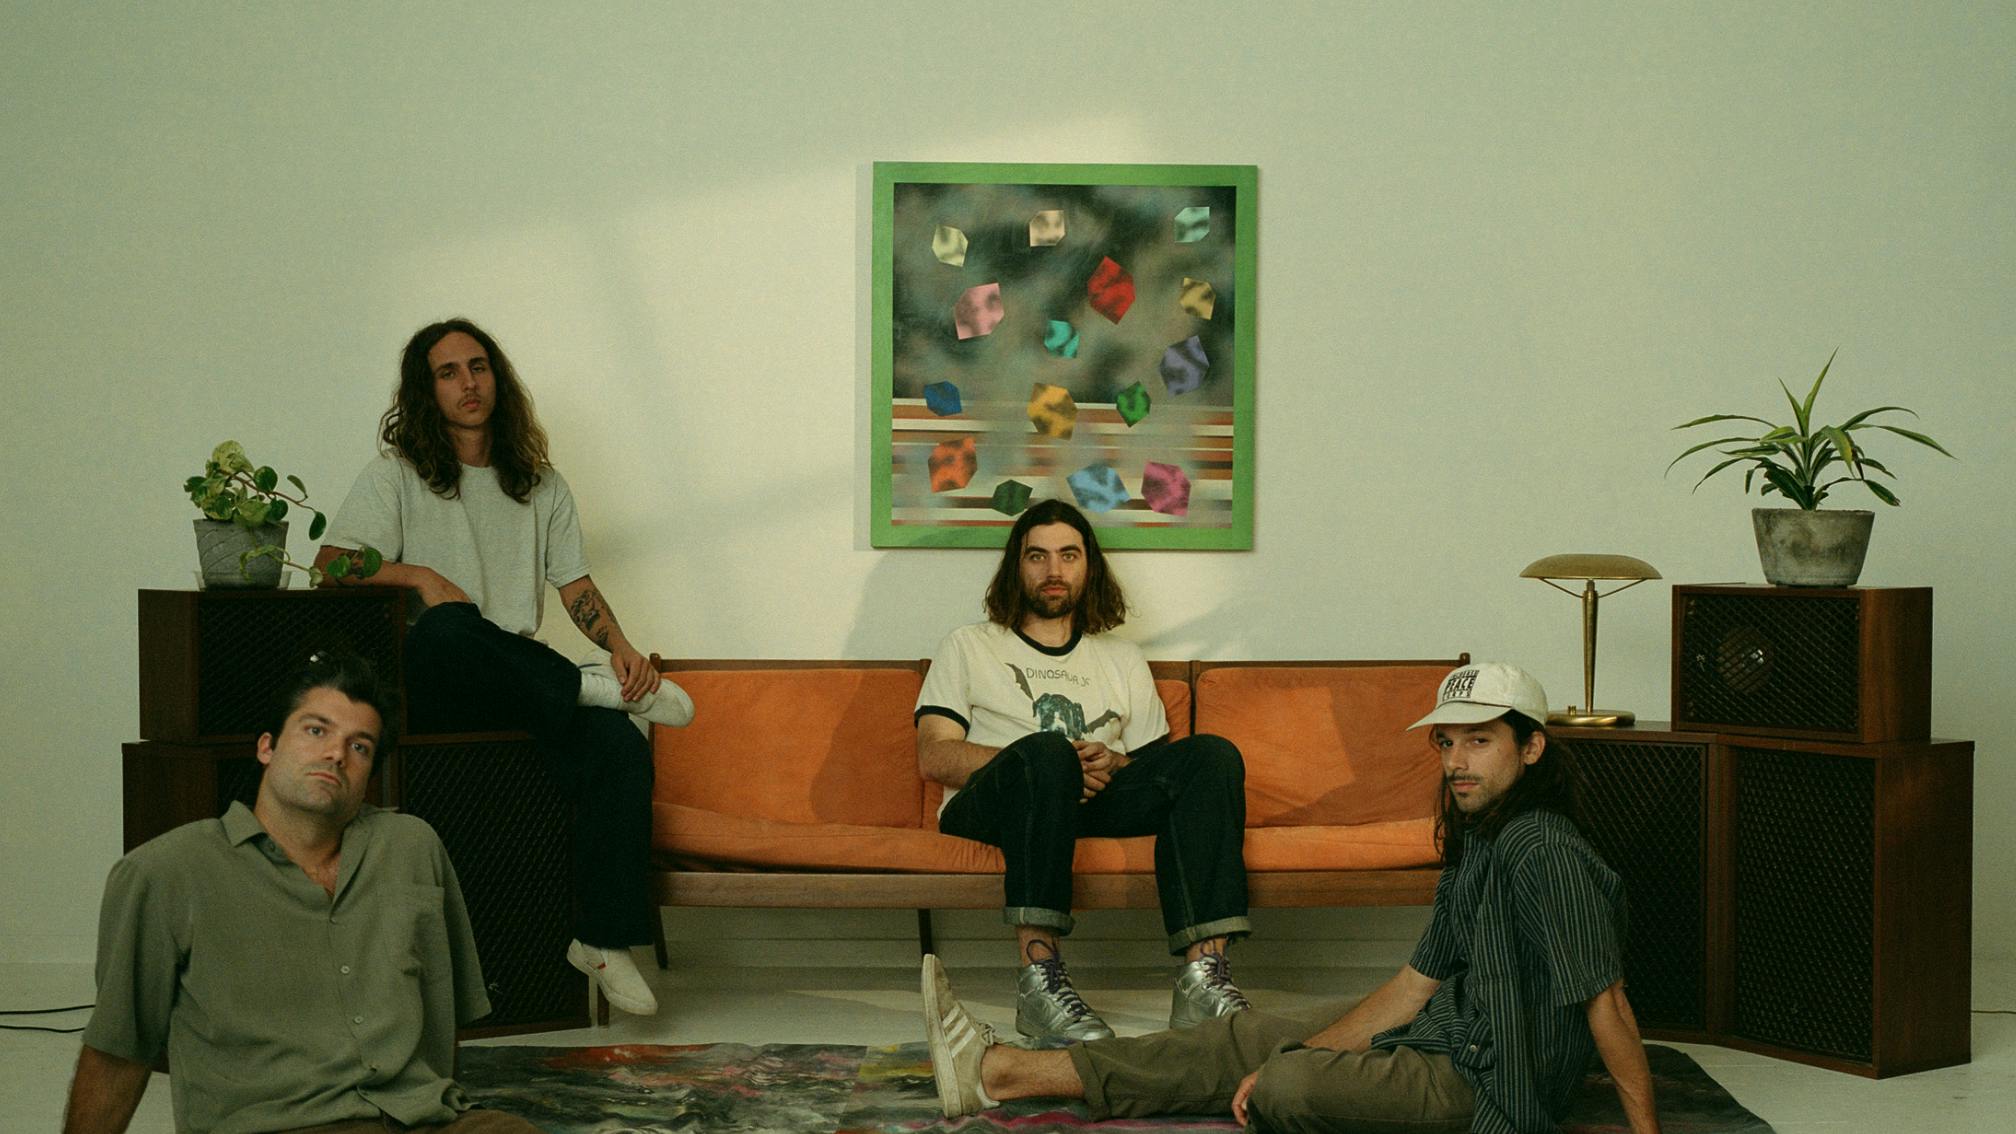 Turnover announce new record Myself In The Way